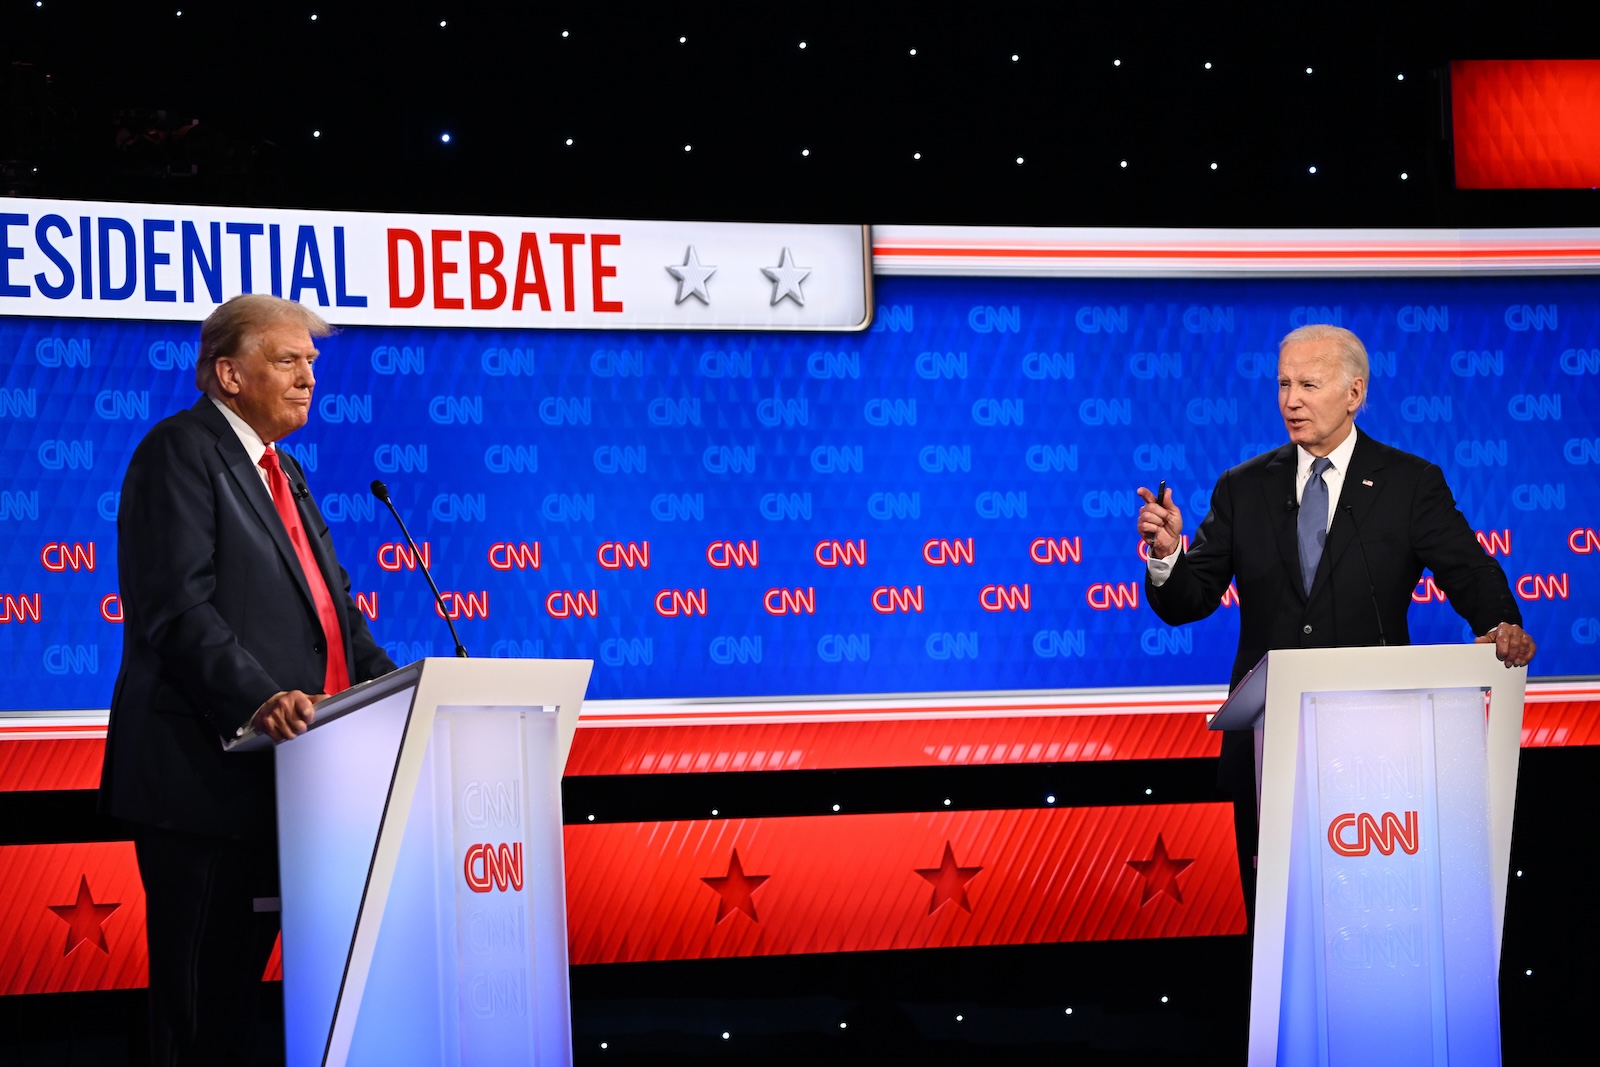 epa11442527 US President Joe Biden (R) and former US President Donald J. Trump (L) participate in the first 2024 presidential election debate, at Georgia Institute of Technologyâ€™s McCamish Pavilion in Atlanta, Georgia, USA, 27 June 2024. The first 2024 presidential election debate is hosted by CNN.  EPA/WILL LANZONI / CNN PHOTOS MANDATORY CREDIT: CNN PHOTOS / CREDIT CNN - WILL LANZONI   EDITORIAL USE ONLY  EDITORIAL USE ONLY